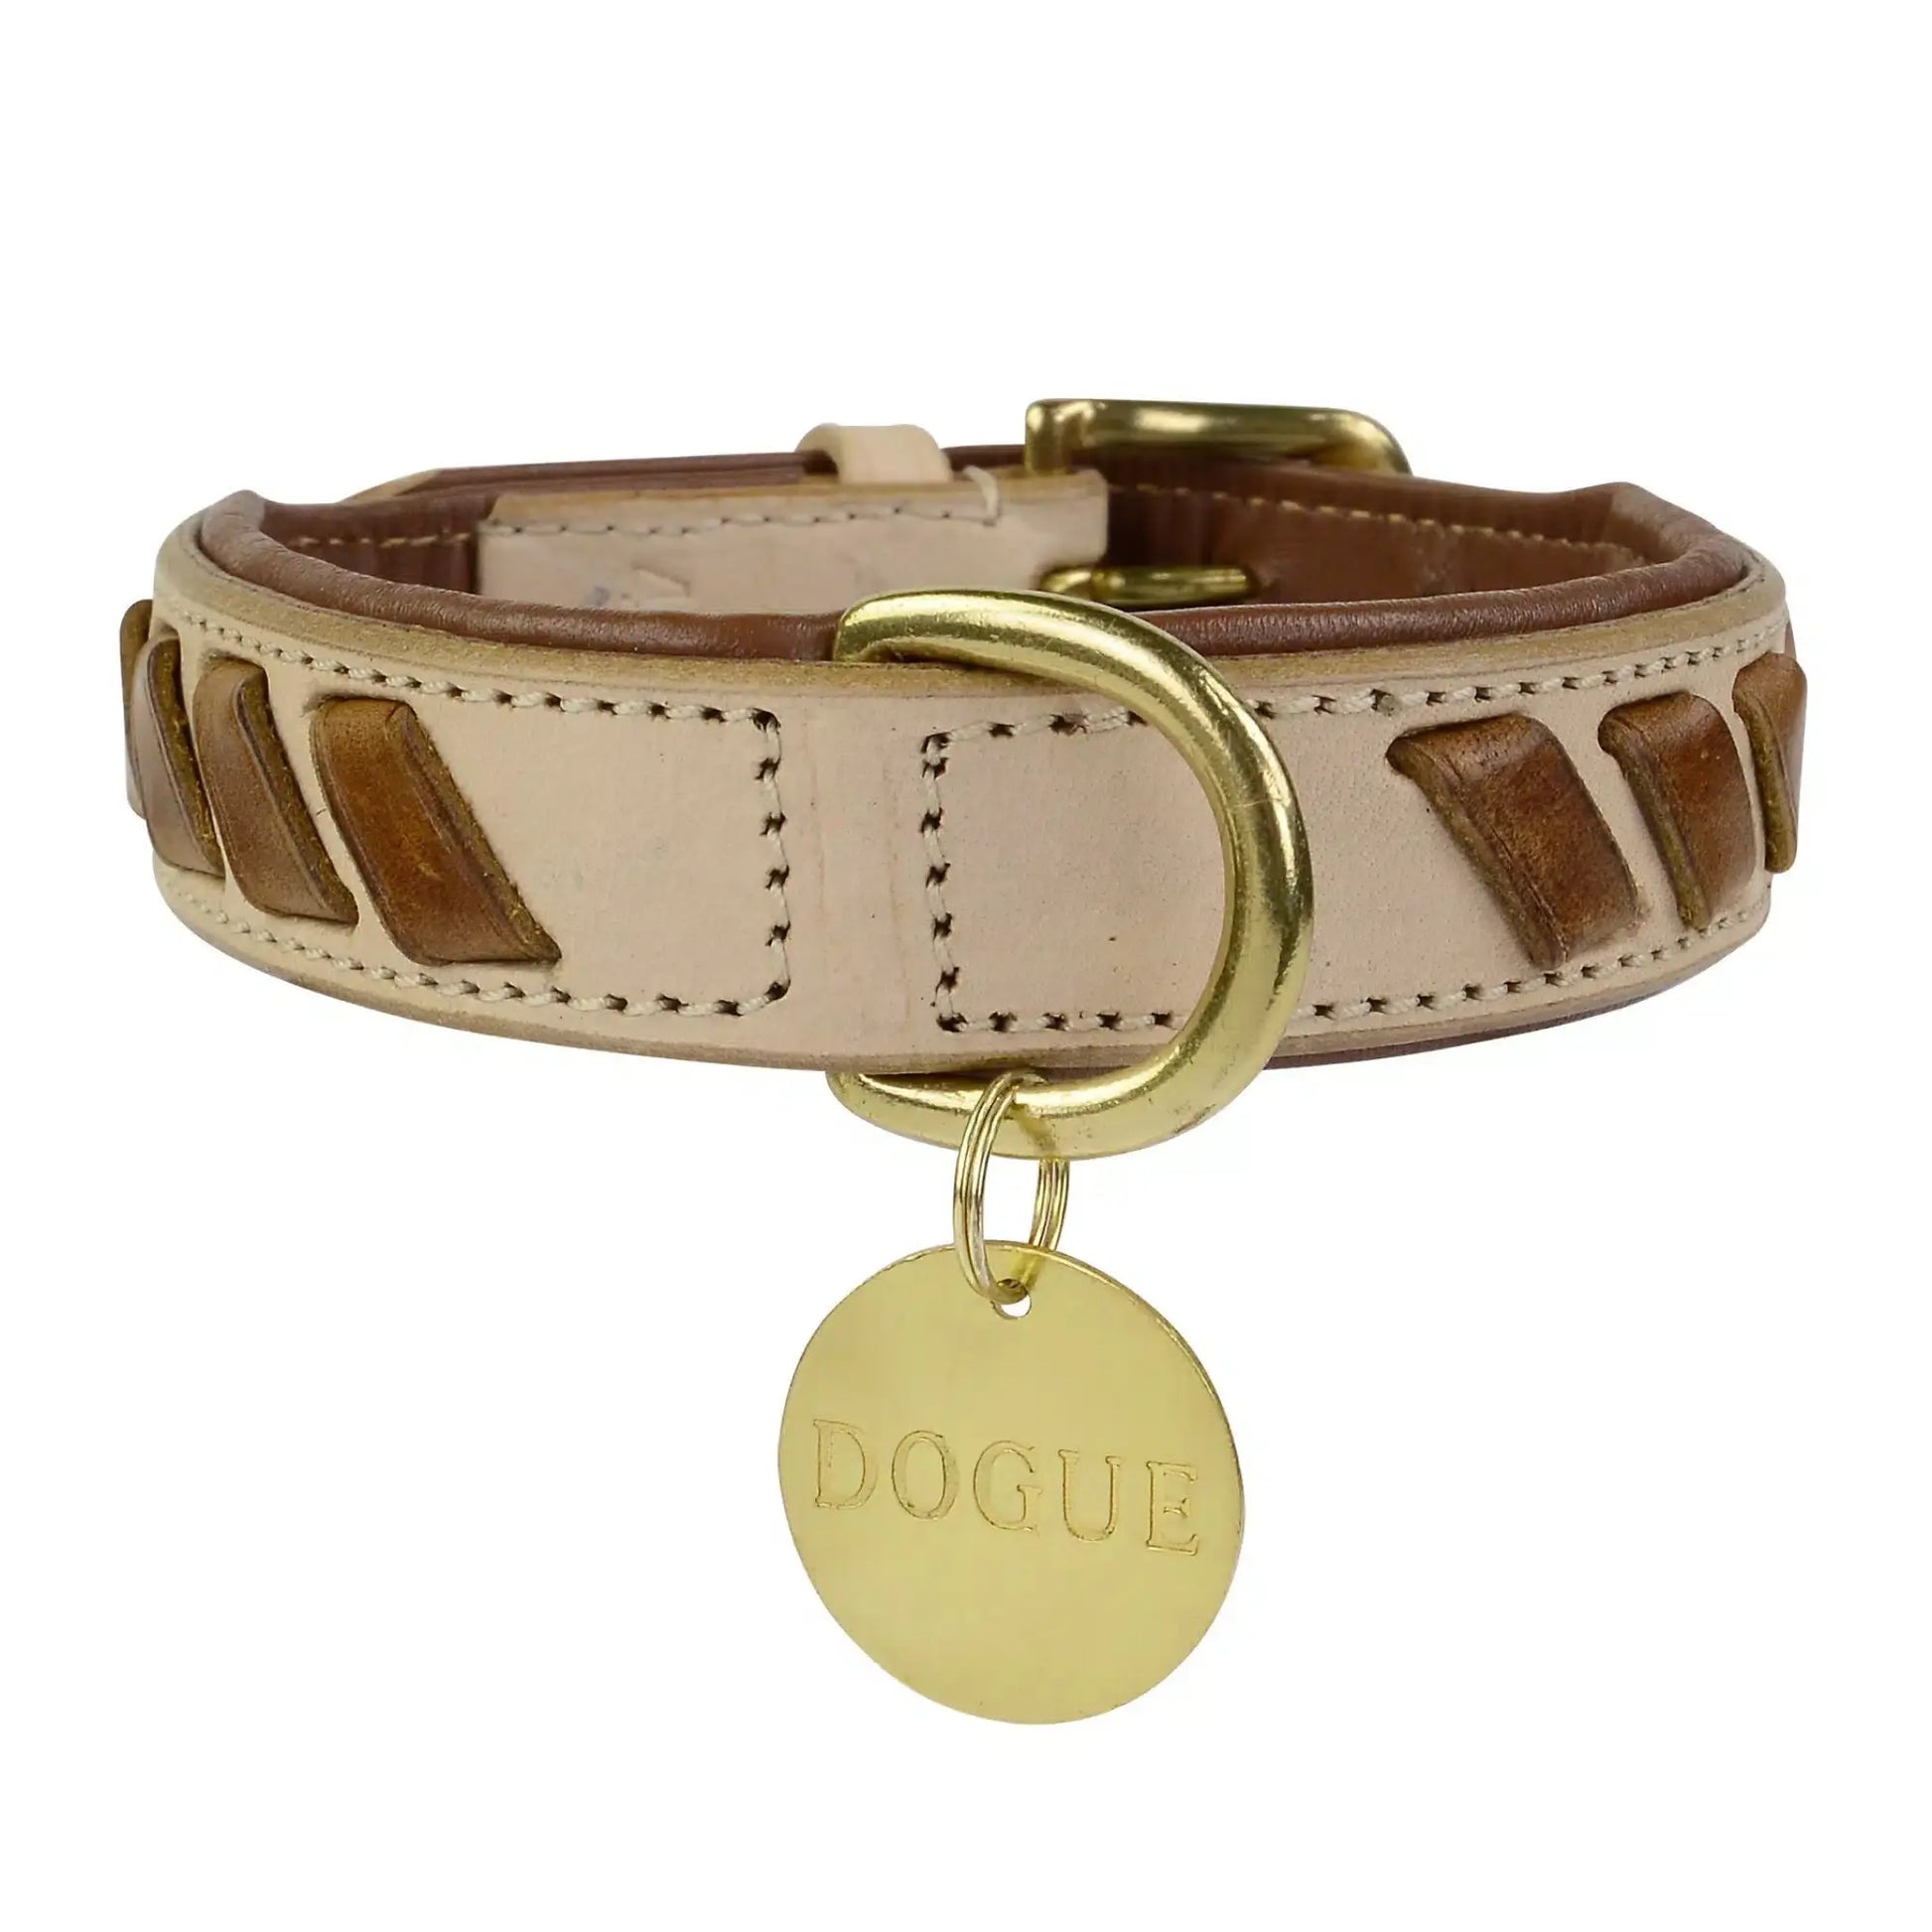 DOGUE Leather Man Dog Collar | Buy Online at DOGUE Australia